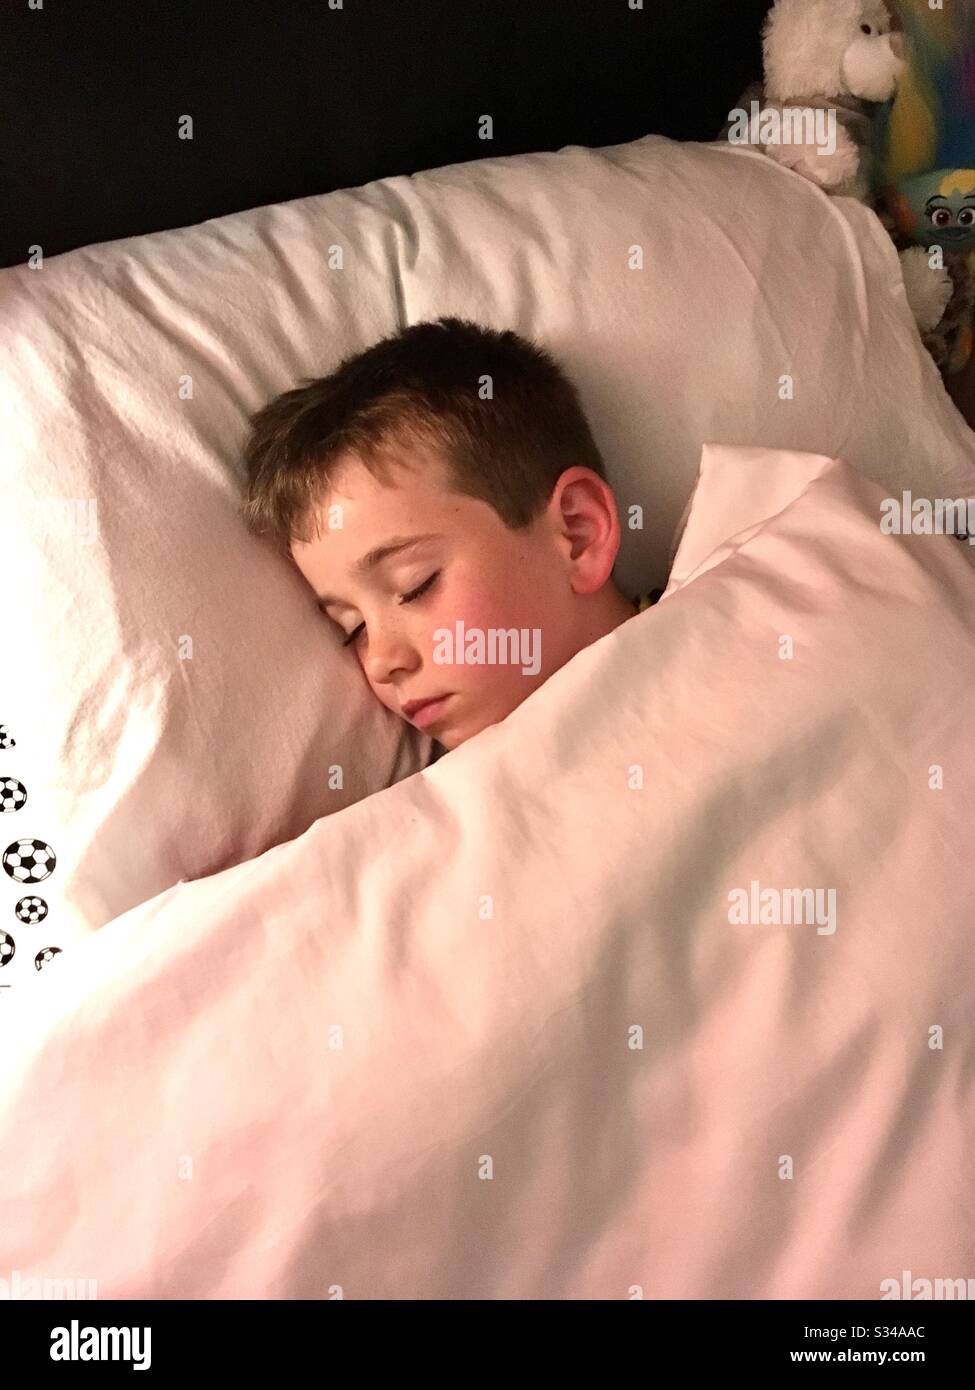 Child asleep in bed Stock Photo